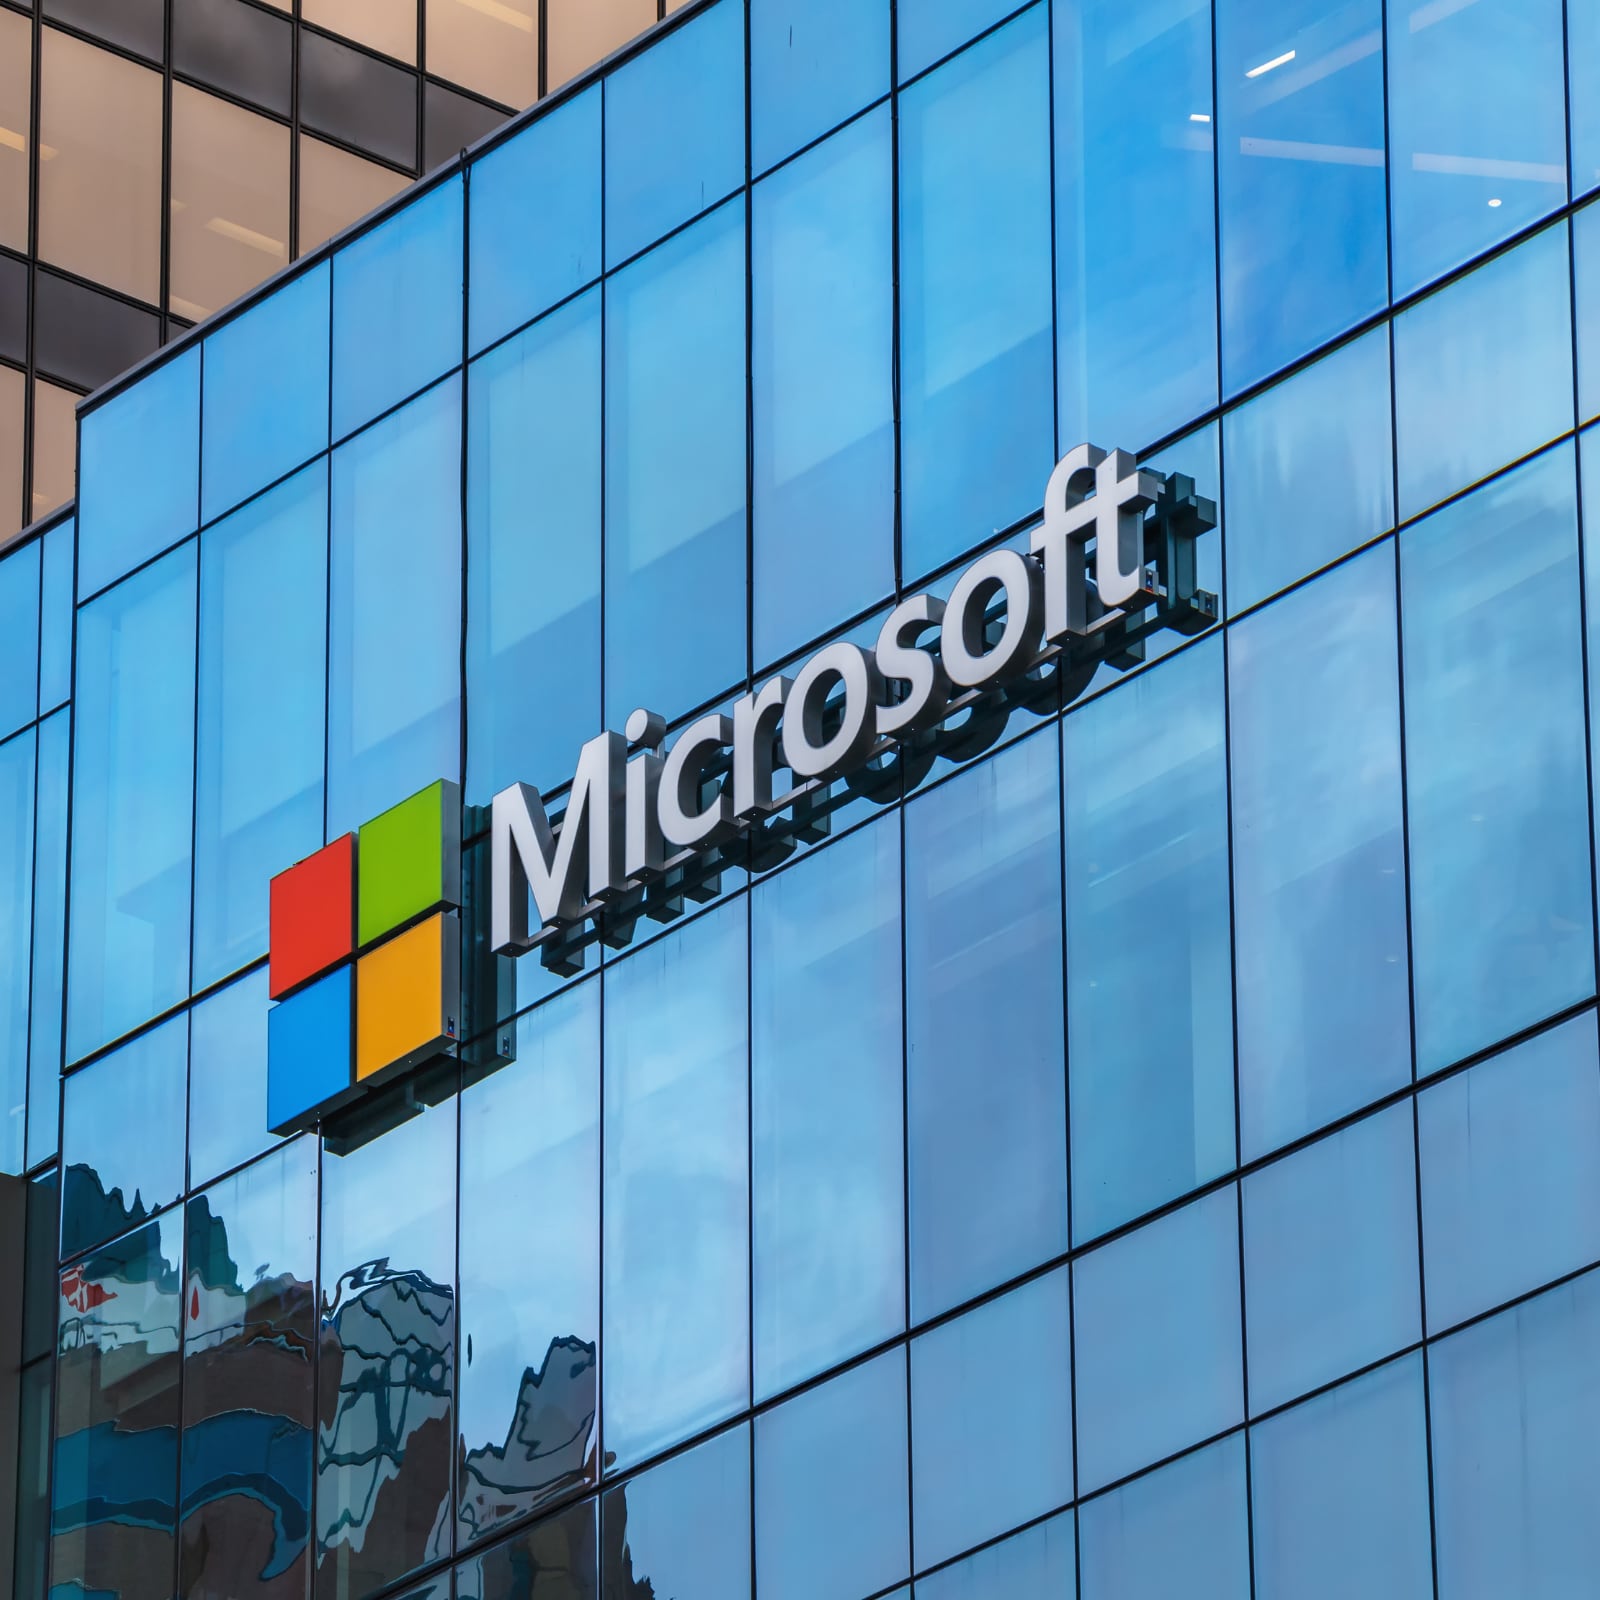 Microsoft To Cut Thousands Of Jobs Across Divisions: Reports